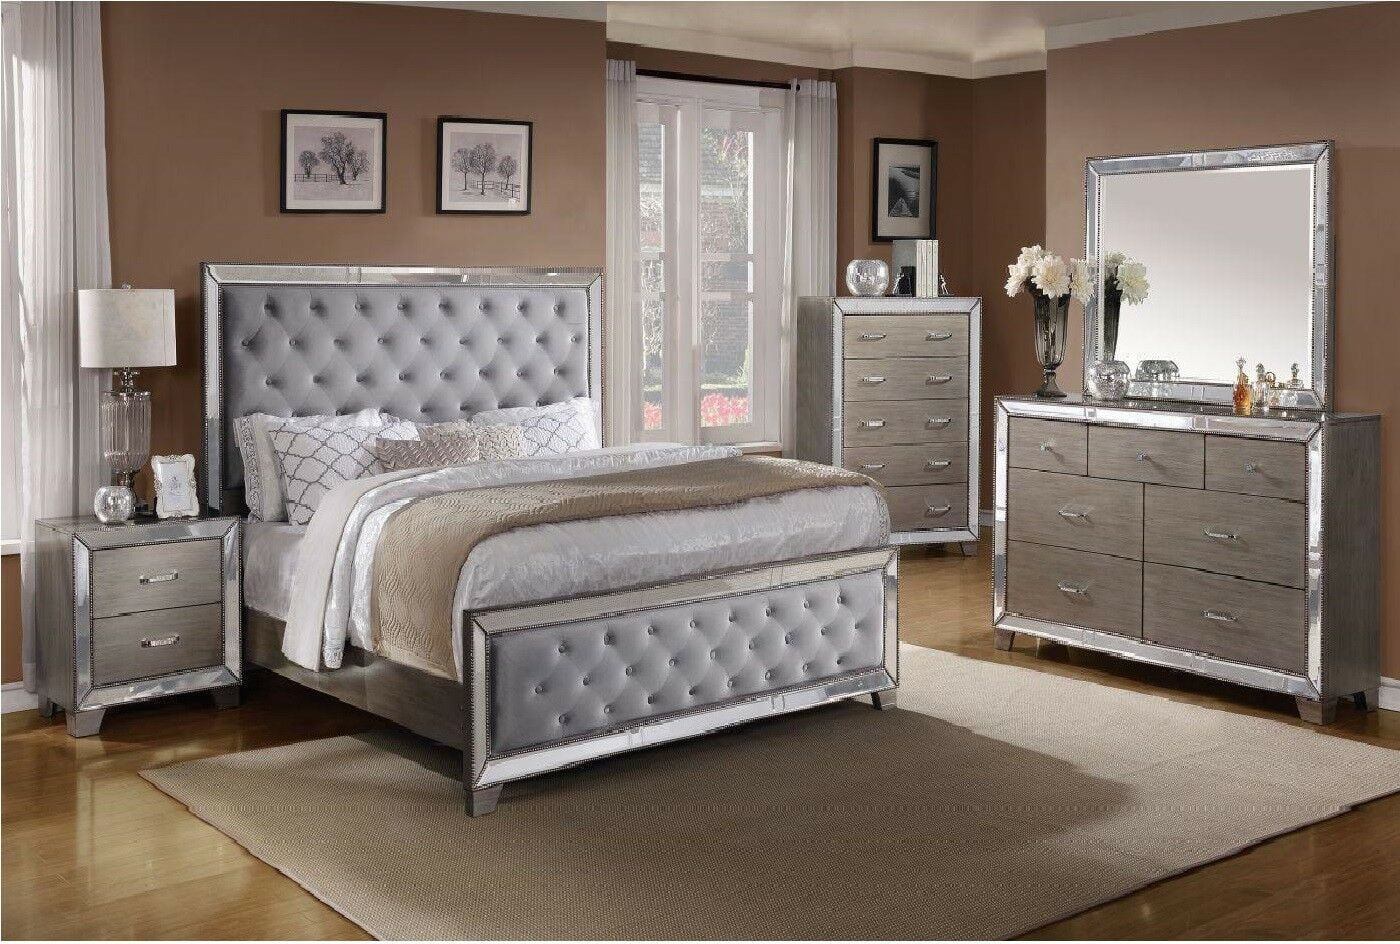 Contemporary Style King Size 4pcs Set Mirrored Accent Bedroom Bed ...